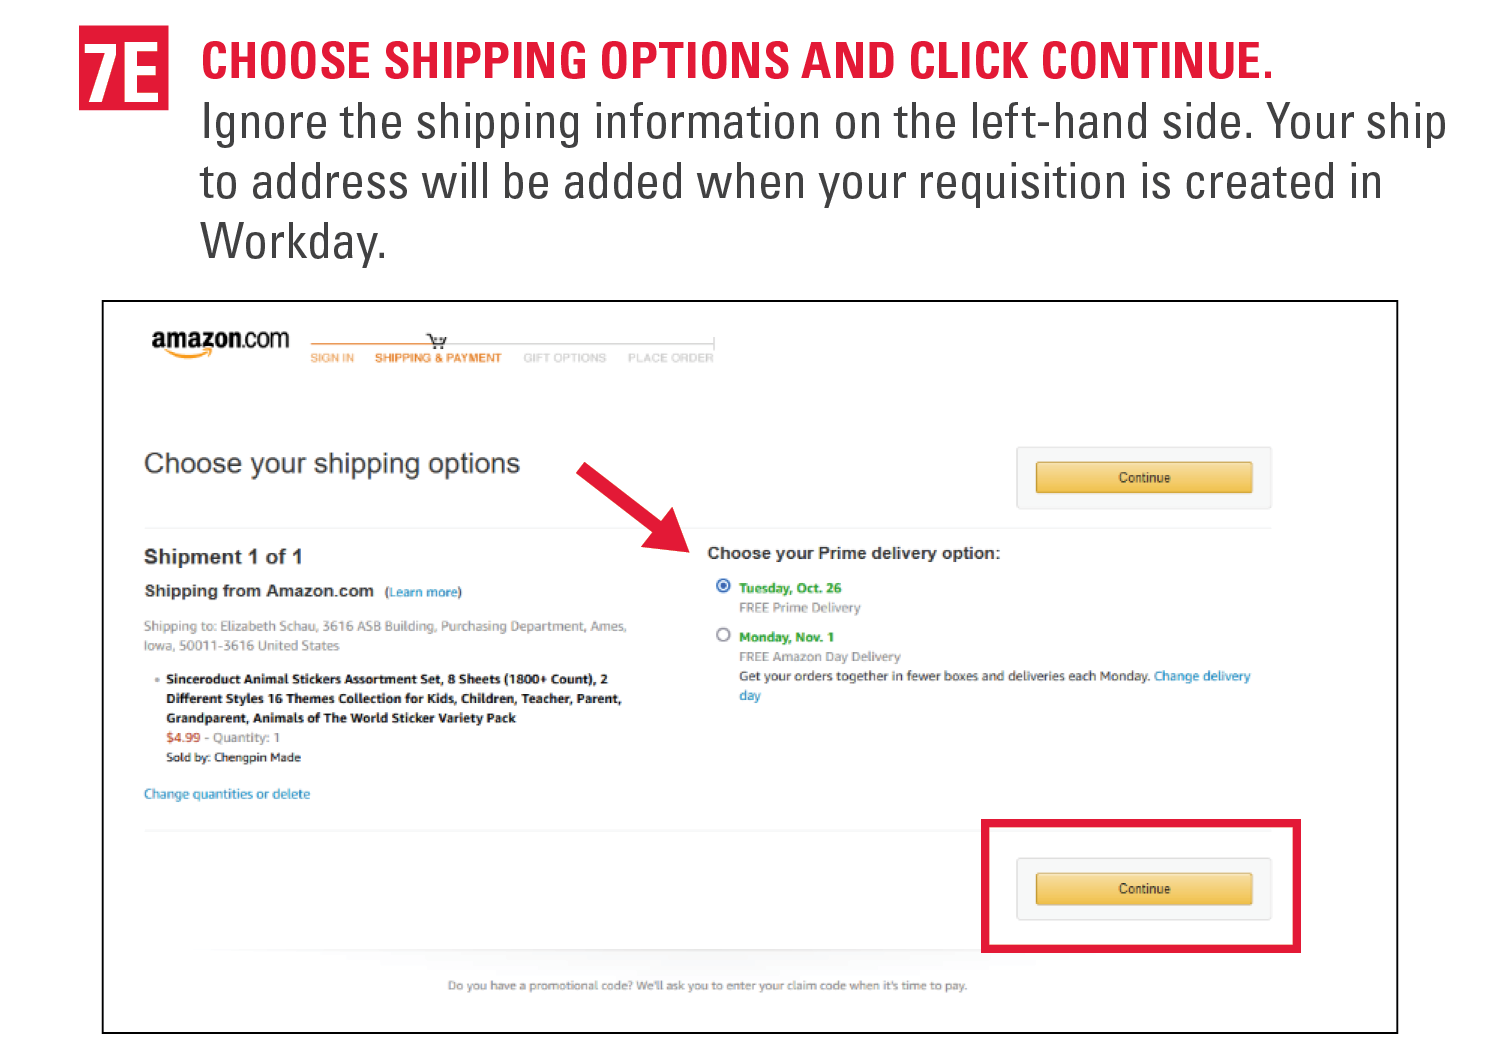 7e. Choose Shipping Options and Click continue. Ignore the shipping information on the left-hand side. Your ship to address will be added when your requisition is created in Workday.